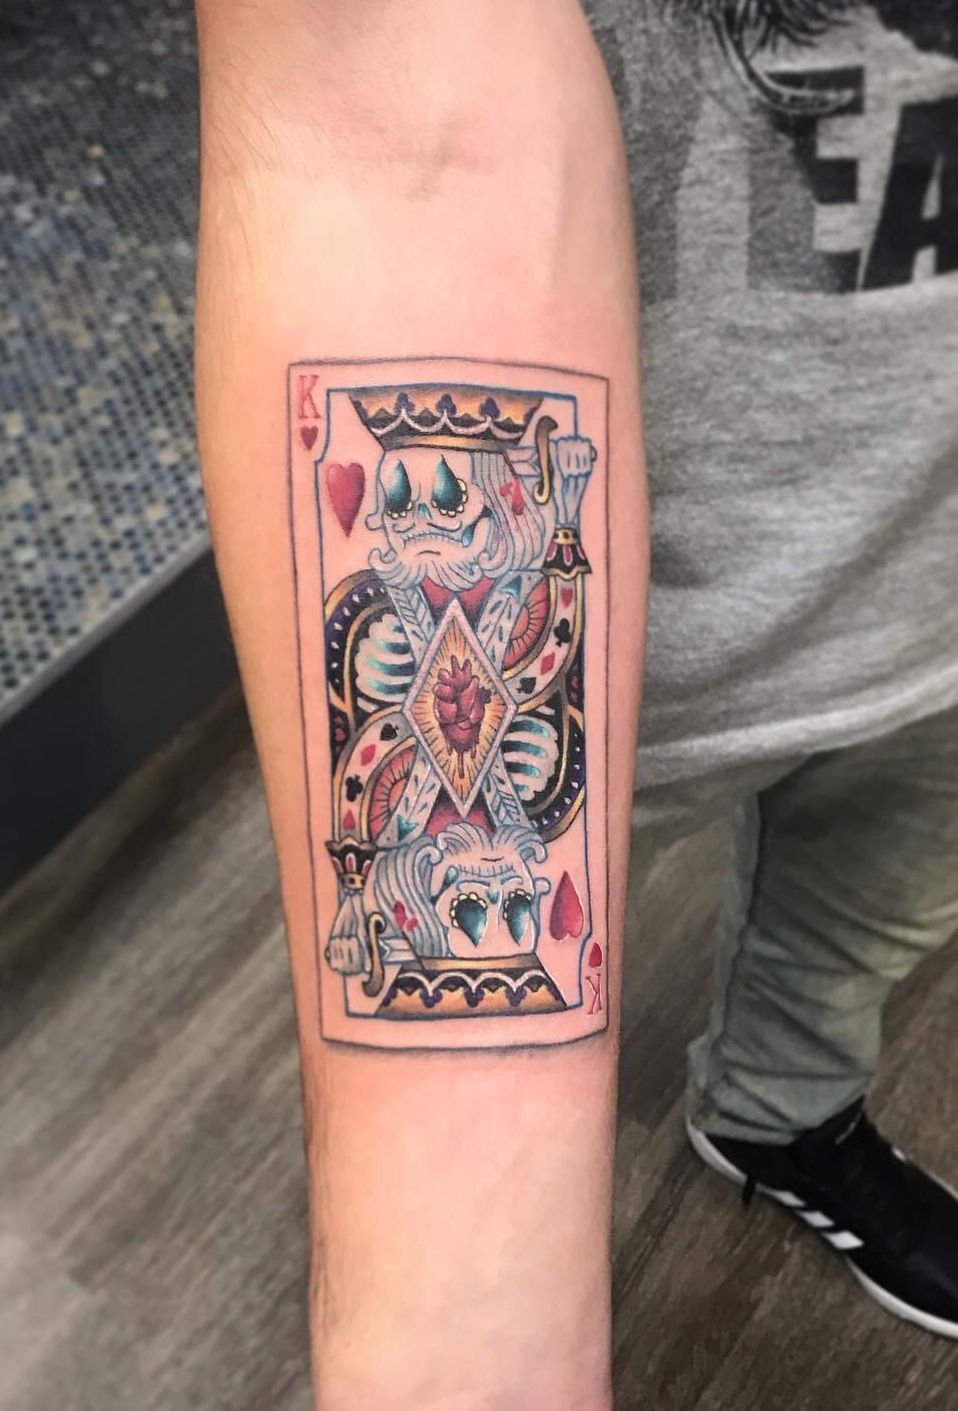 Suicide king card tattoo